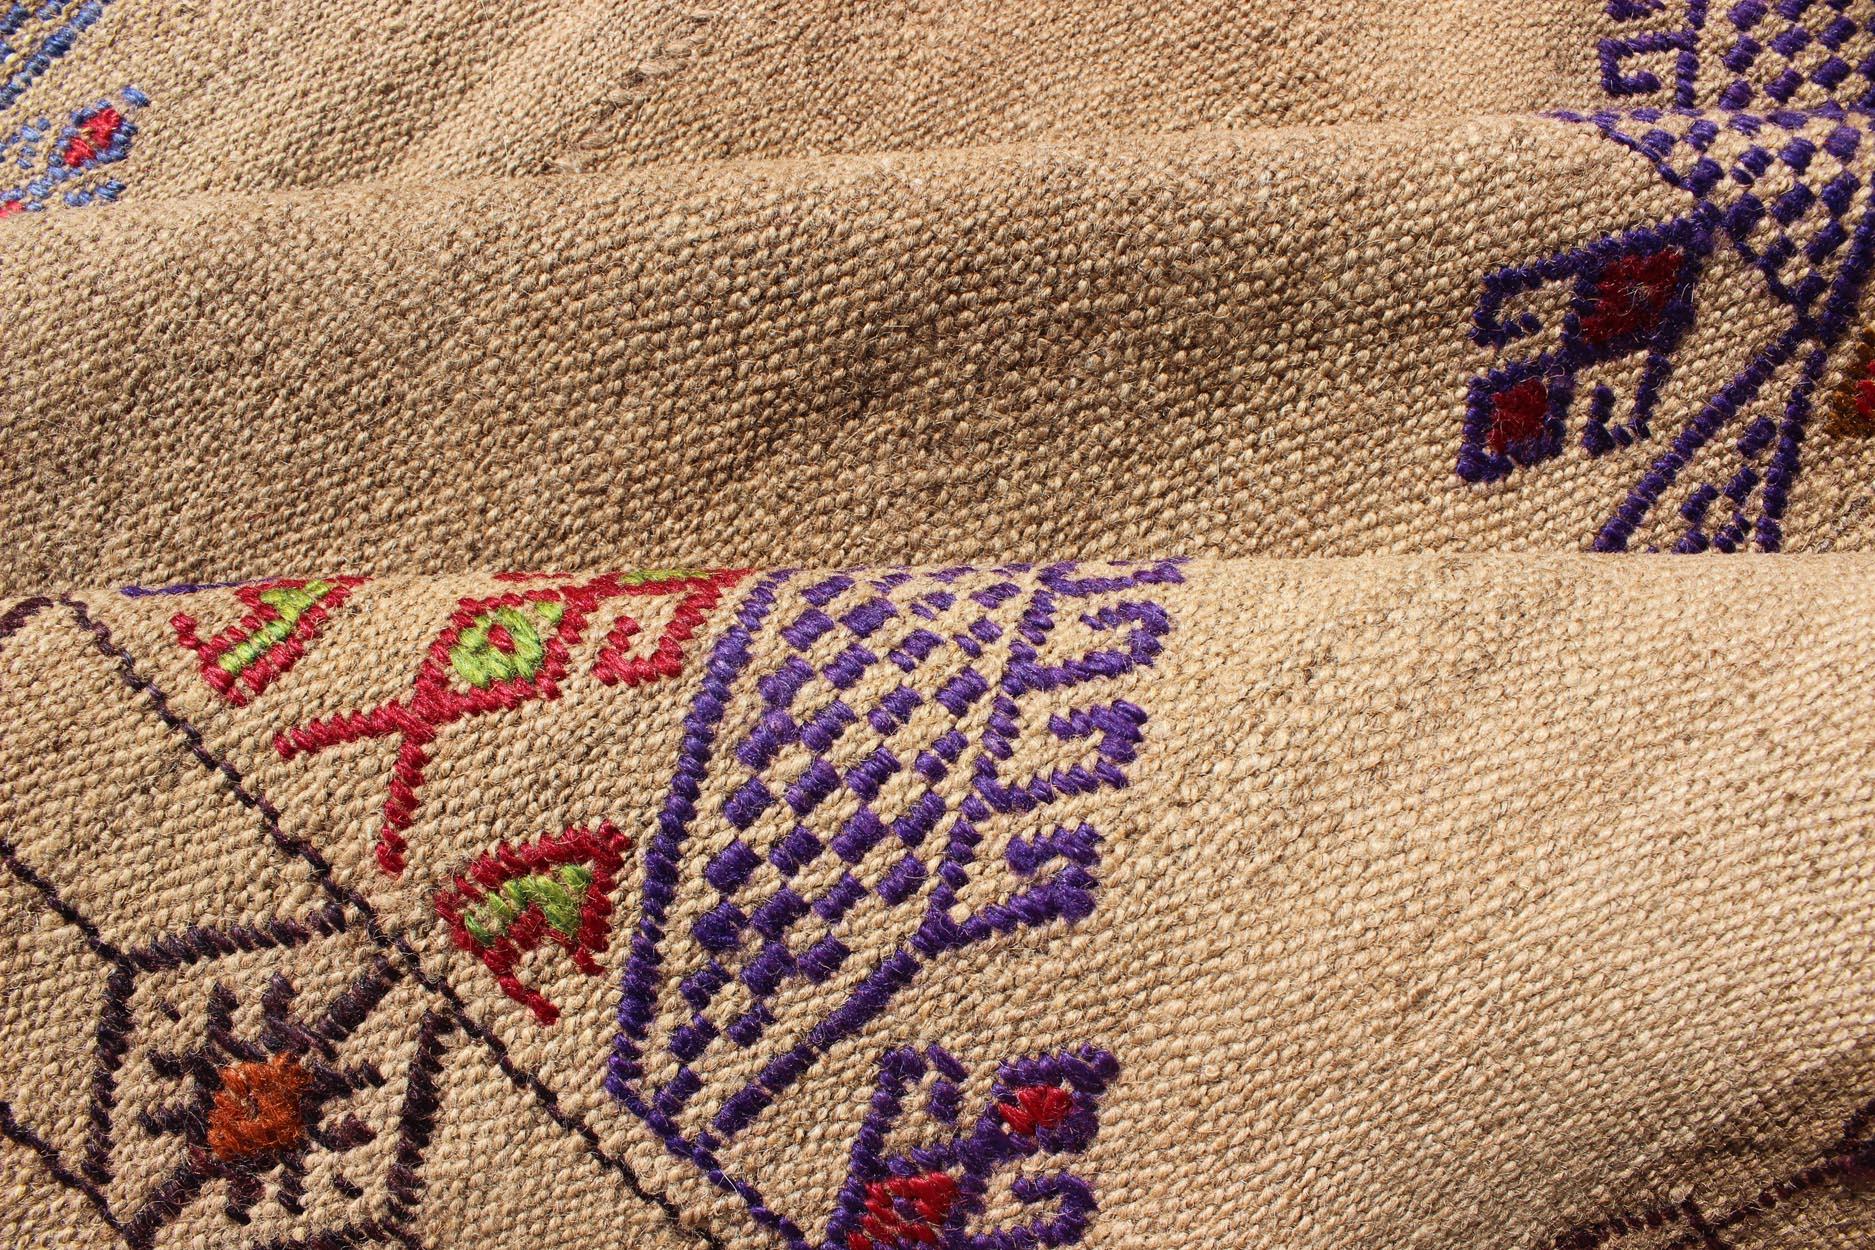 Turkish Kilim Hand Woven Embroidered Purple Diamonds on a Tan Background For Sale 4